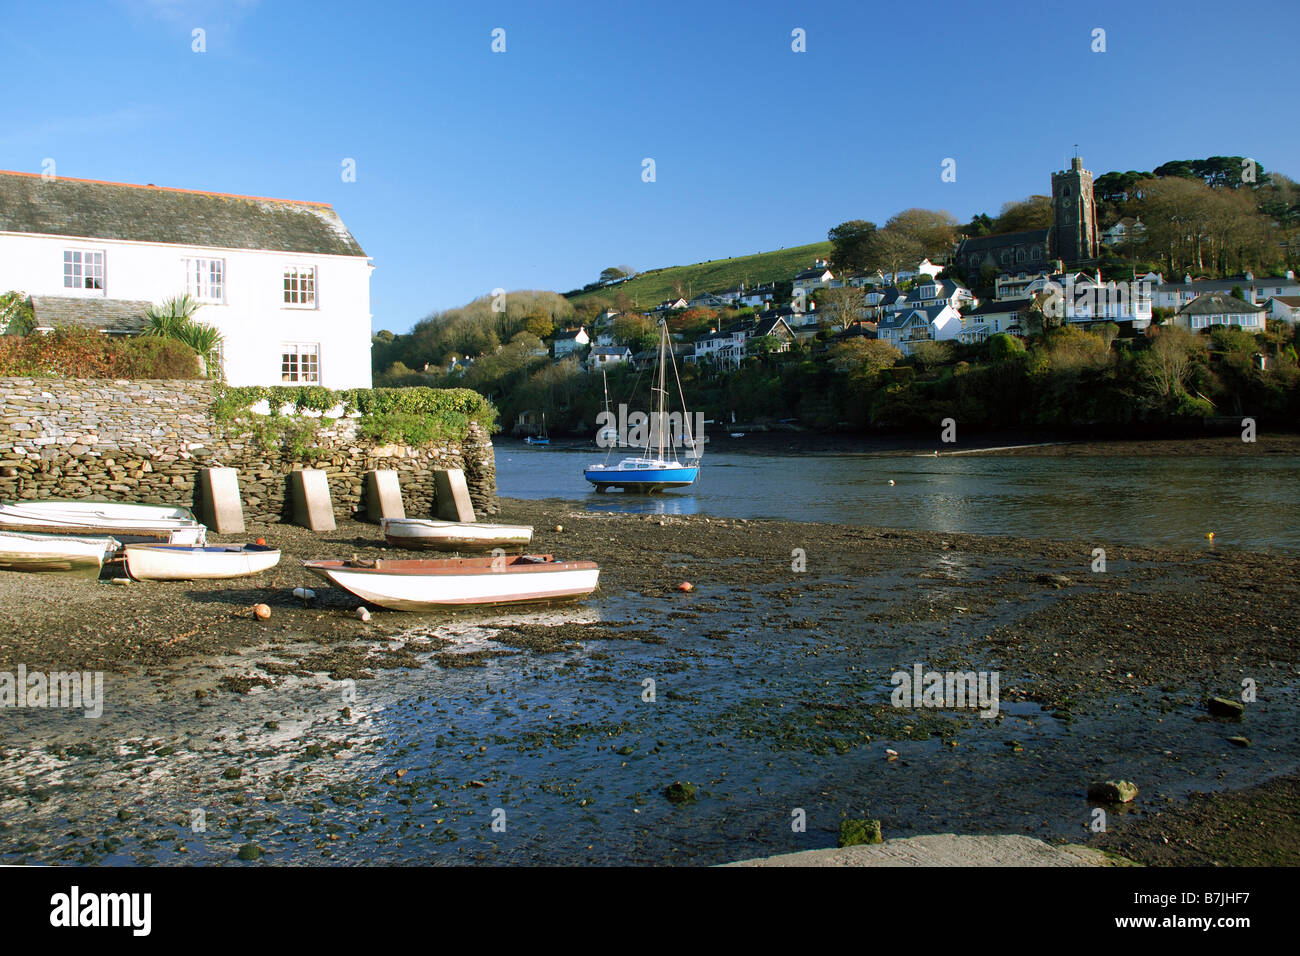 Newton ferrers / Noss mayo on the river yealm in south Devon on a